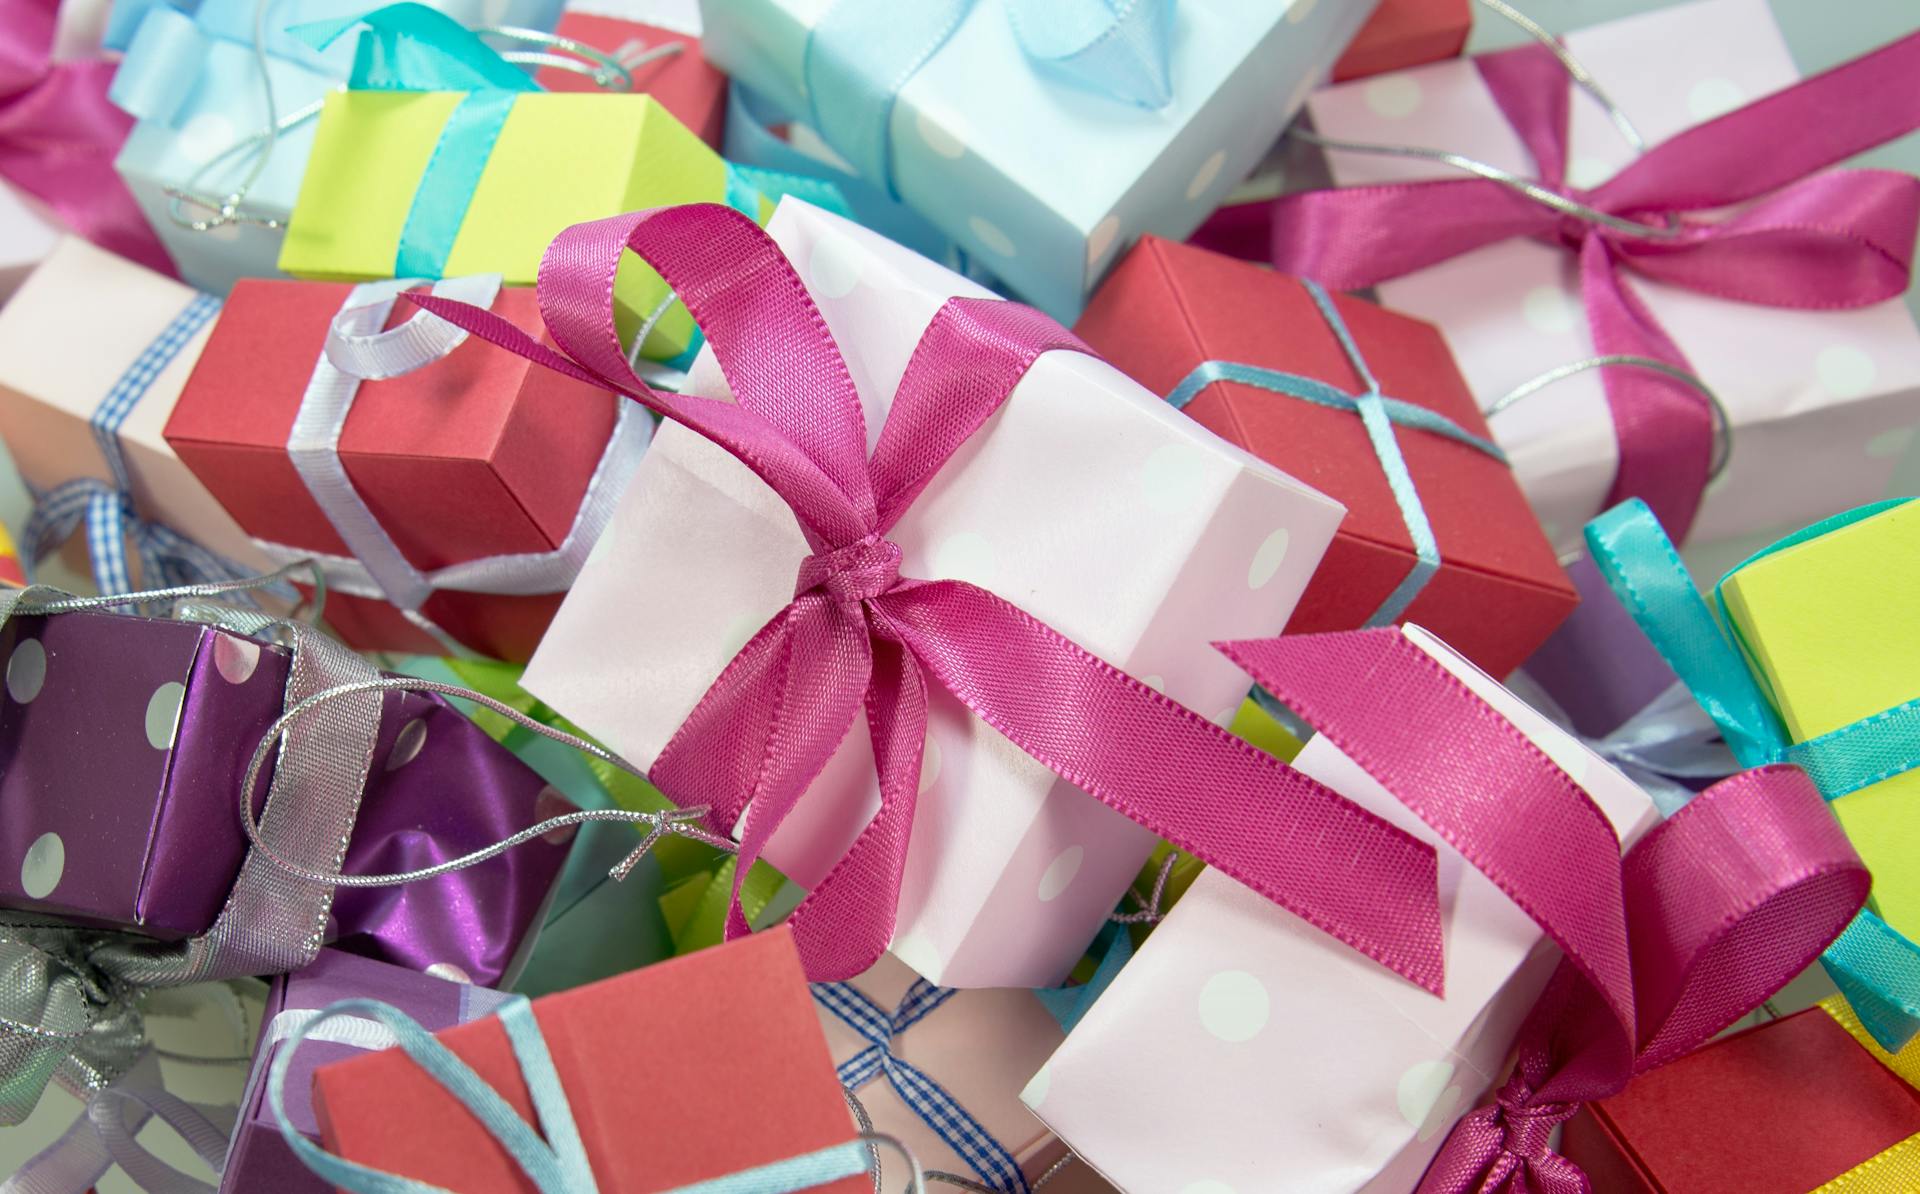 A close-up photo of assorted colored gift boxes | Source: Pexels